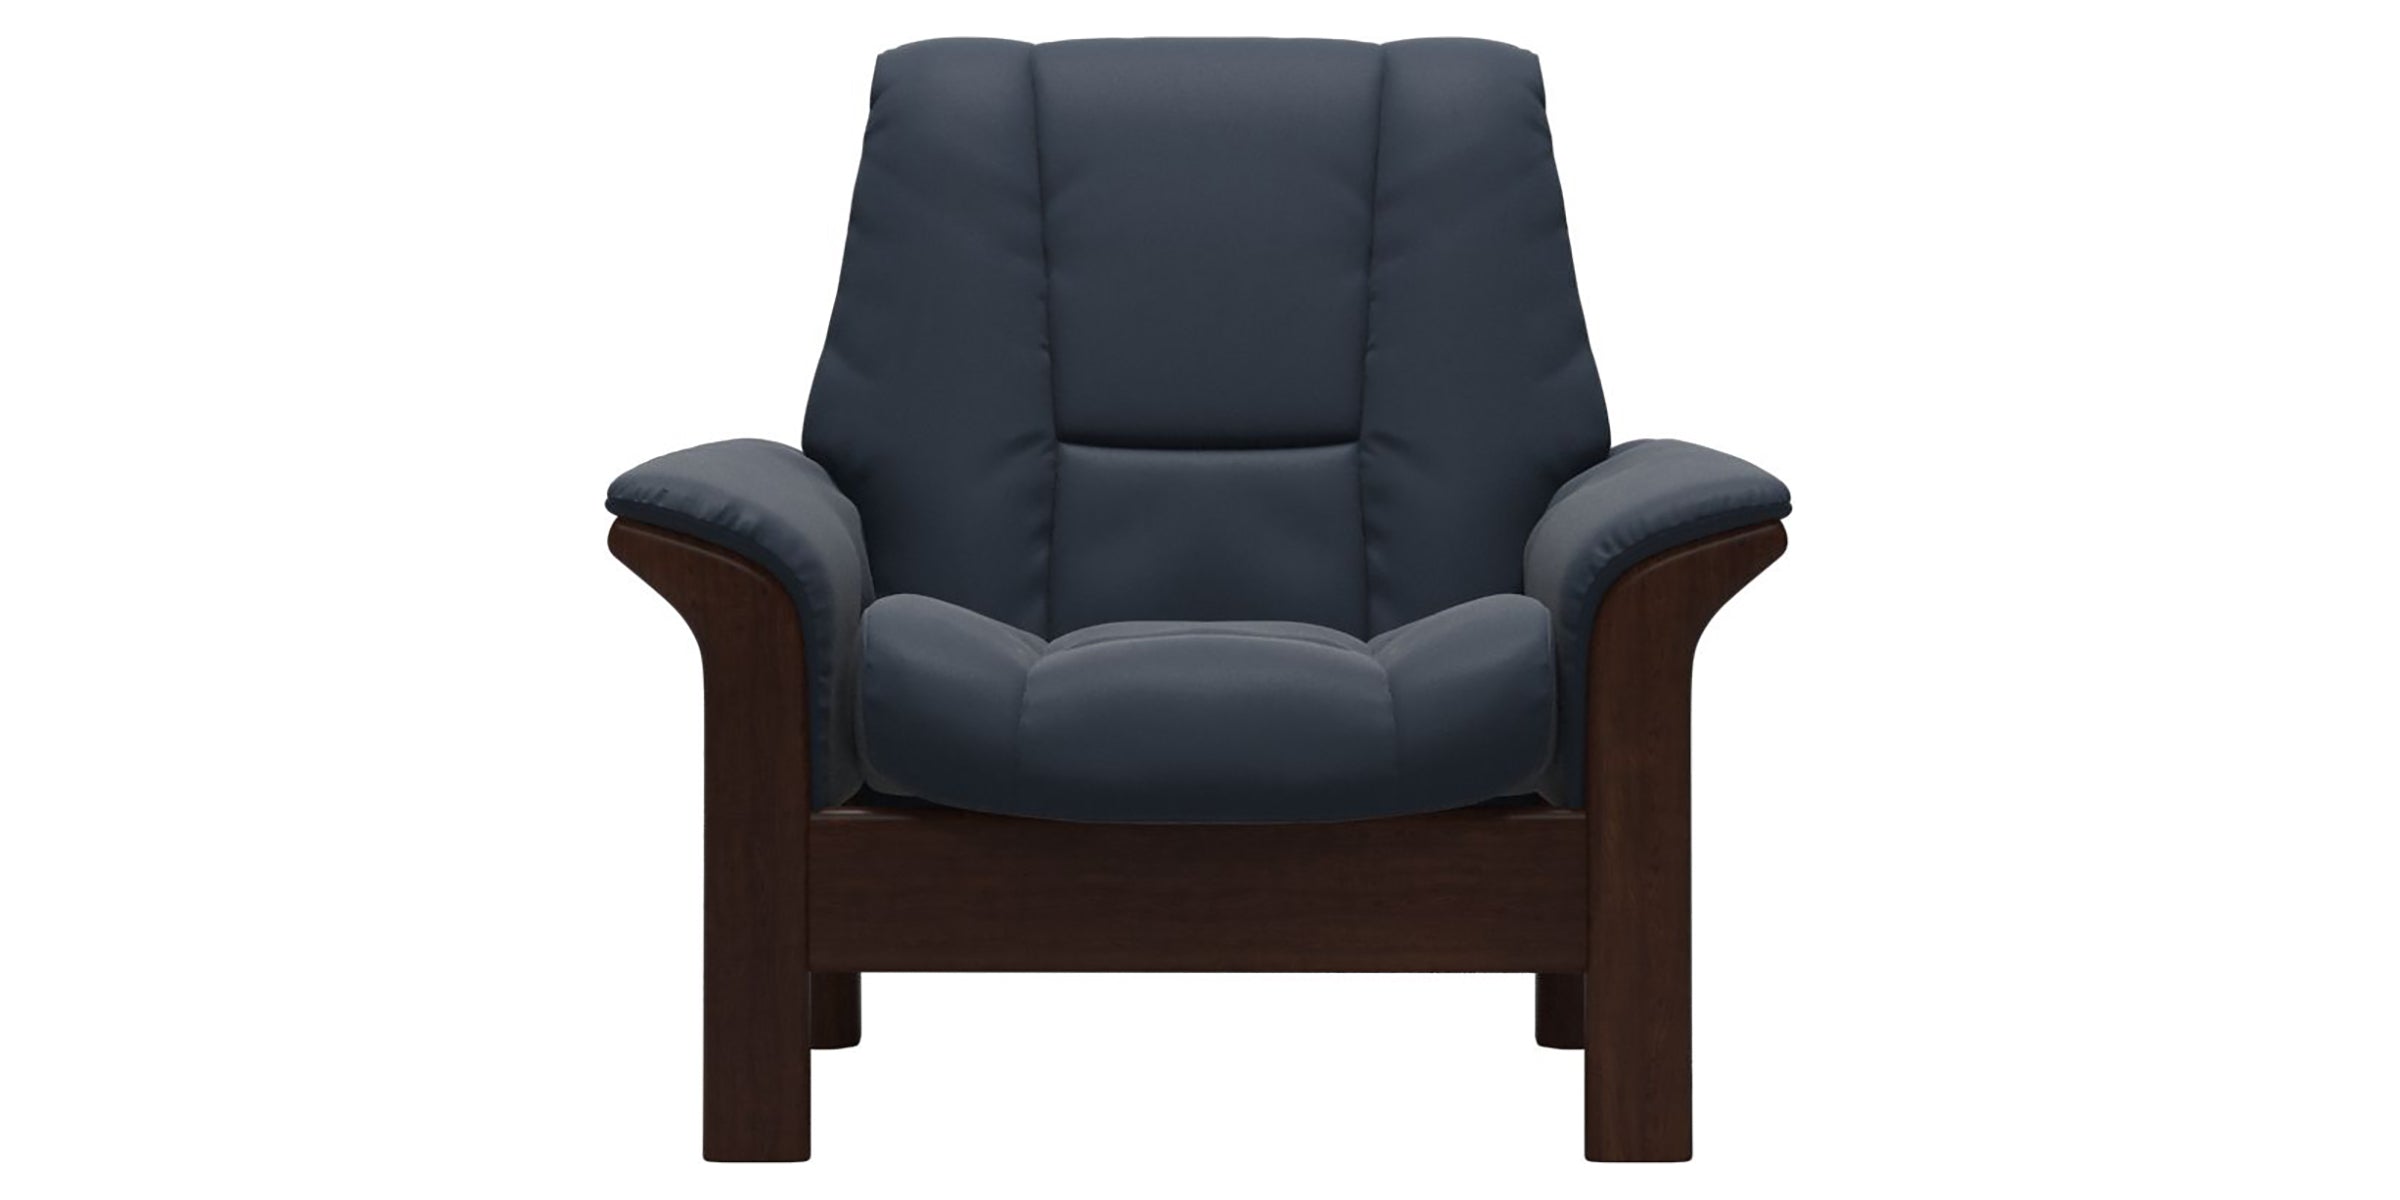 Paloma Leather Oxford Blue and Brown Base | Stressless Windsor Low Back Chair | Valley Ridge Furniture